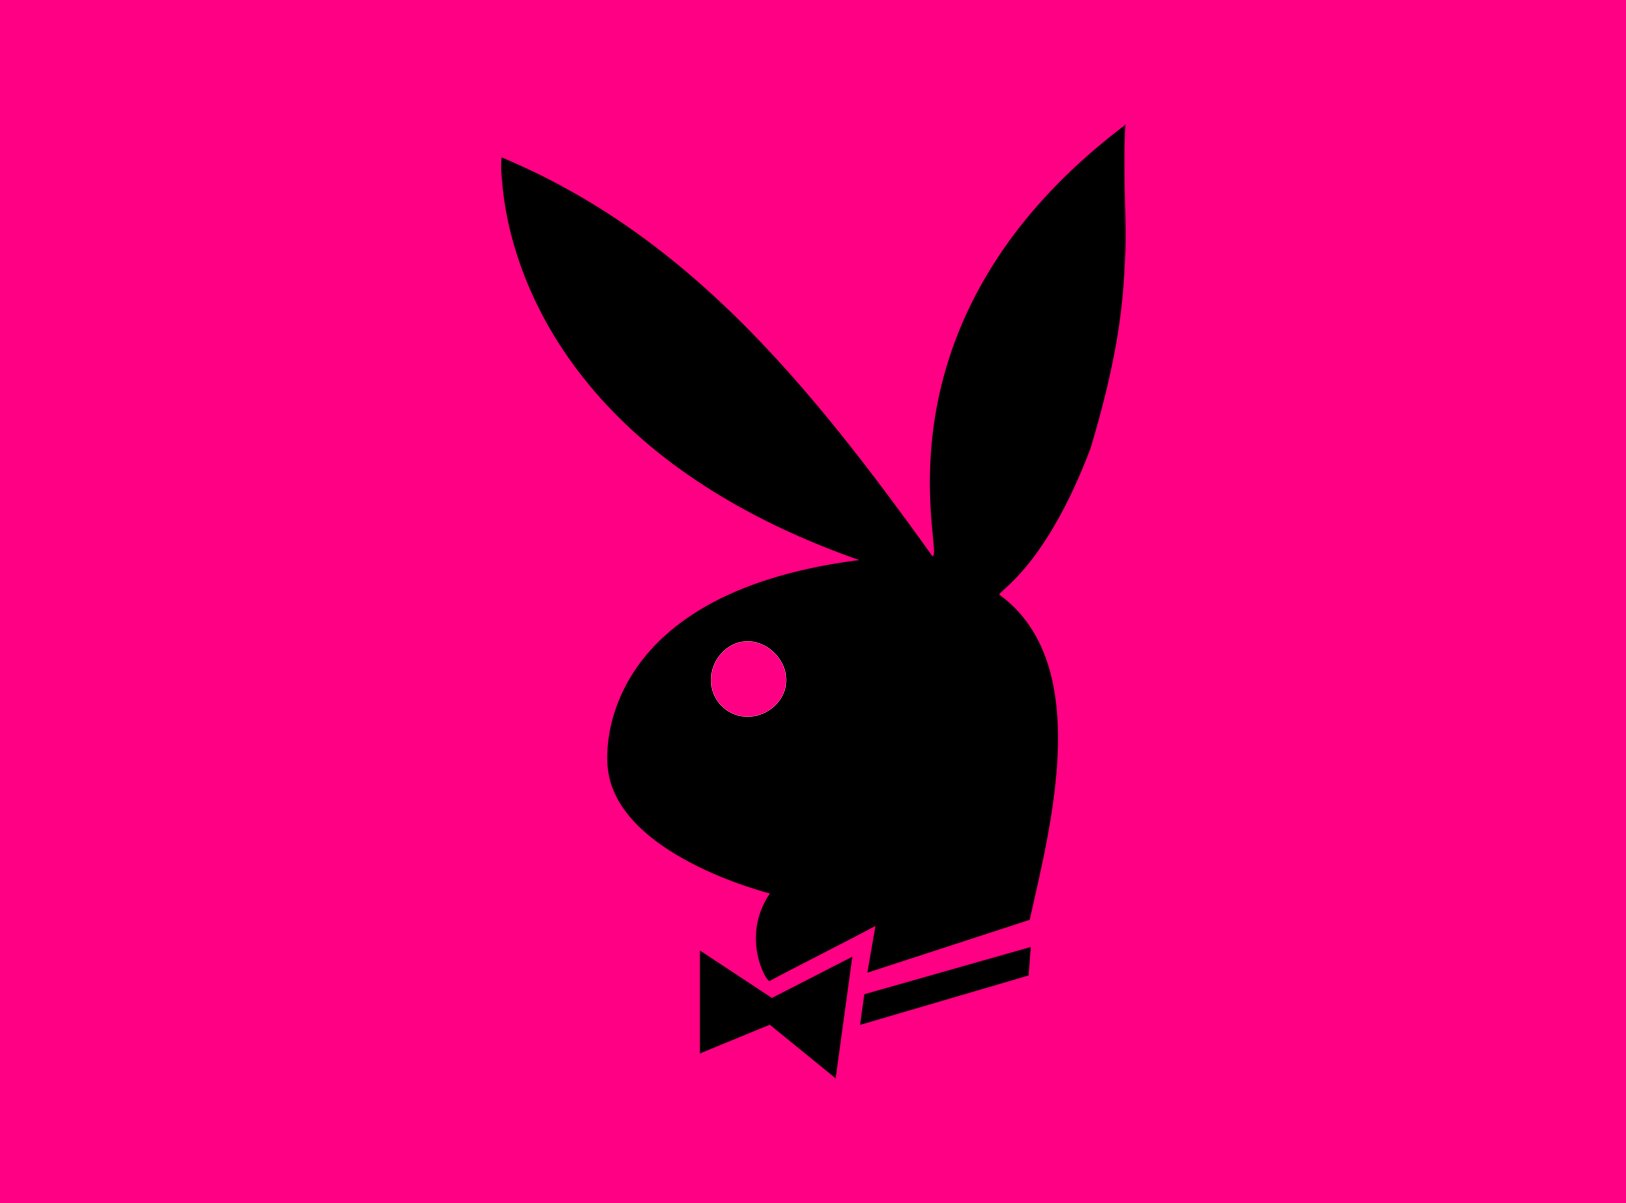 Meaning Playboy logo and symbol | history and evolution1626 x 1203